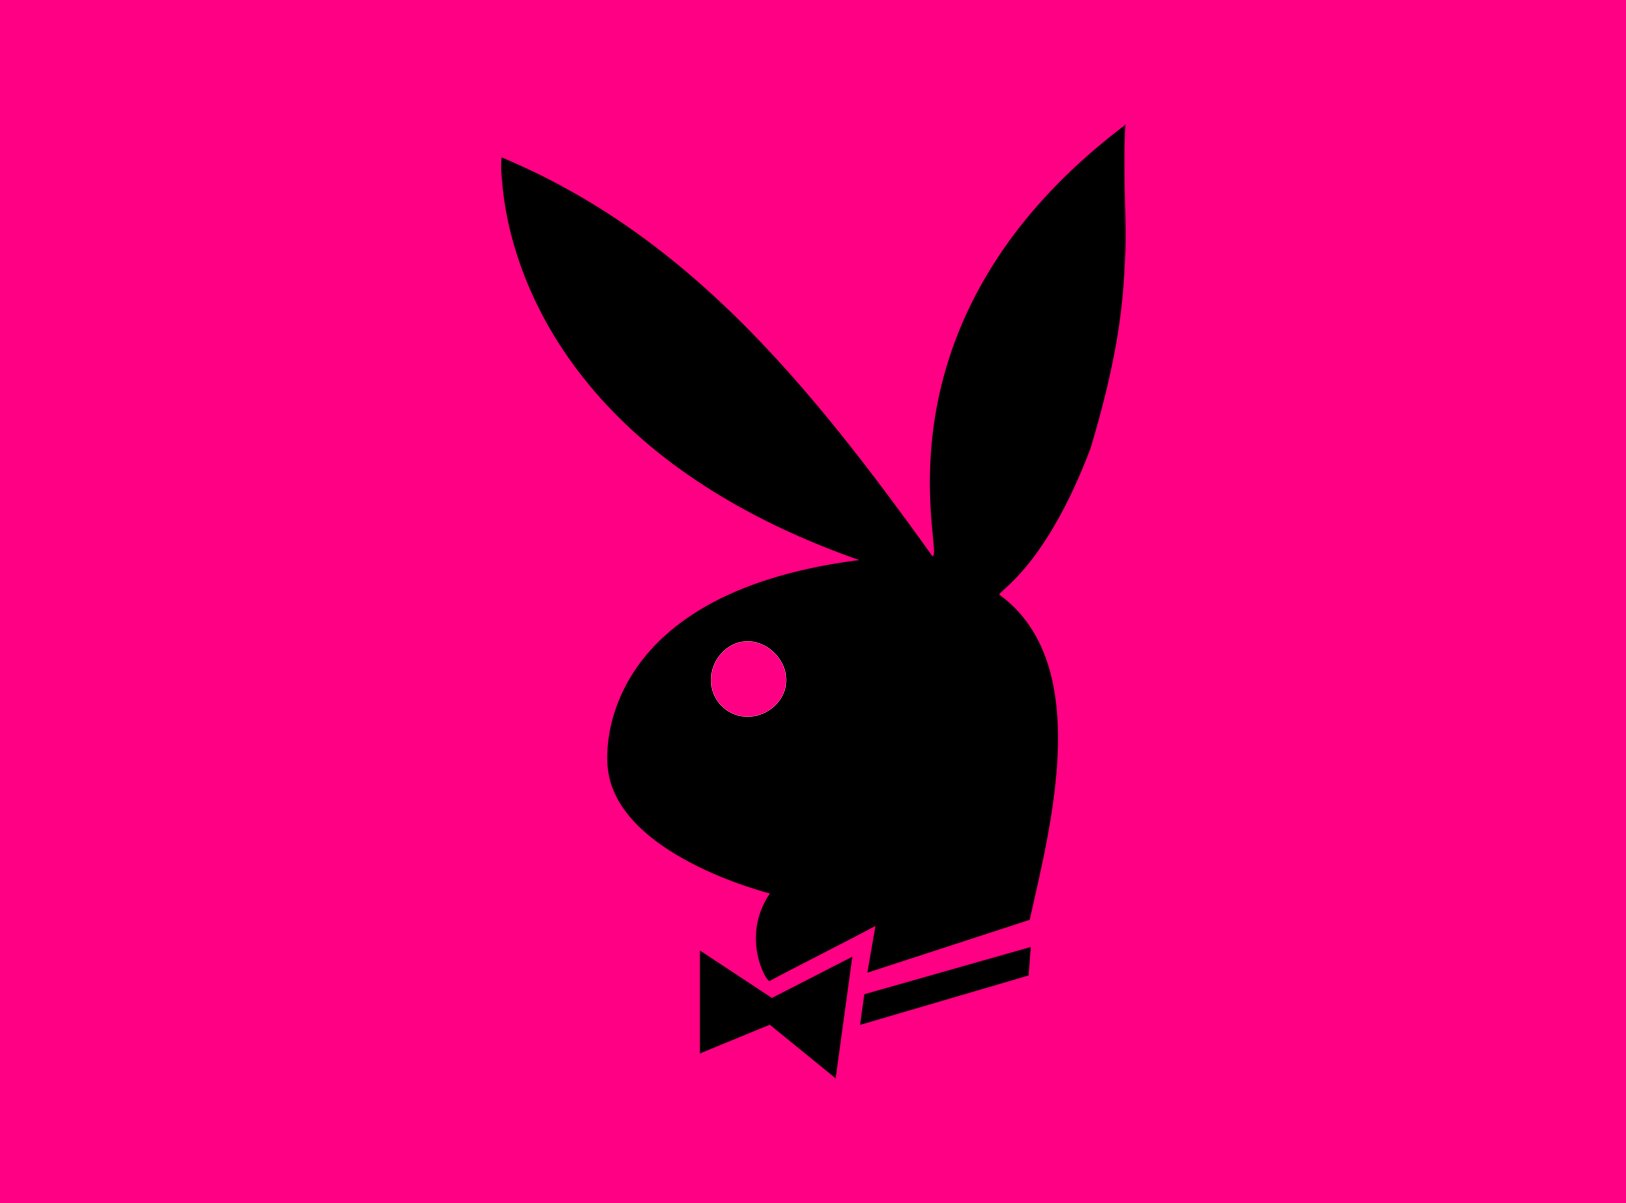 Meaning Playboy logo and symbol | history and evolution1626 x 1203